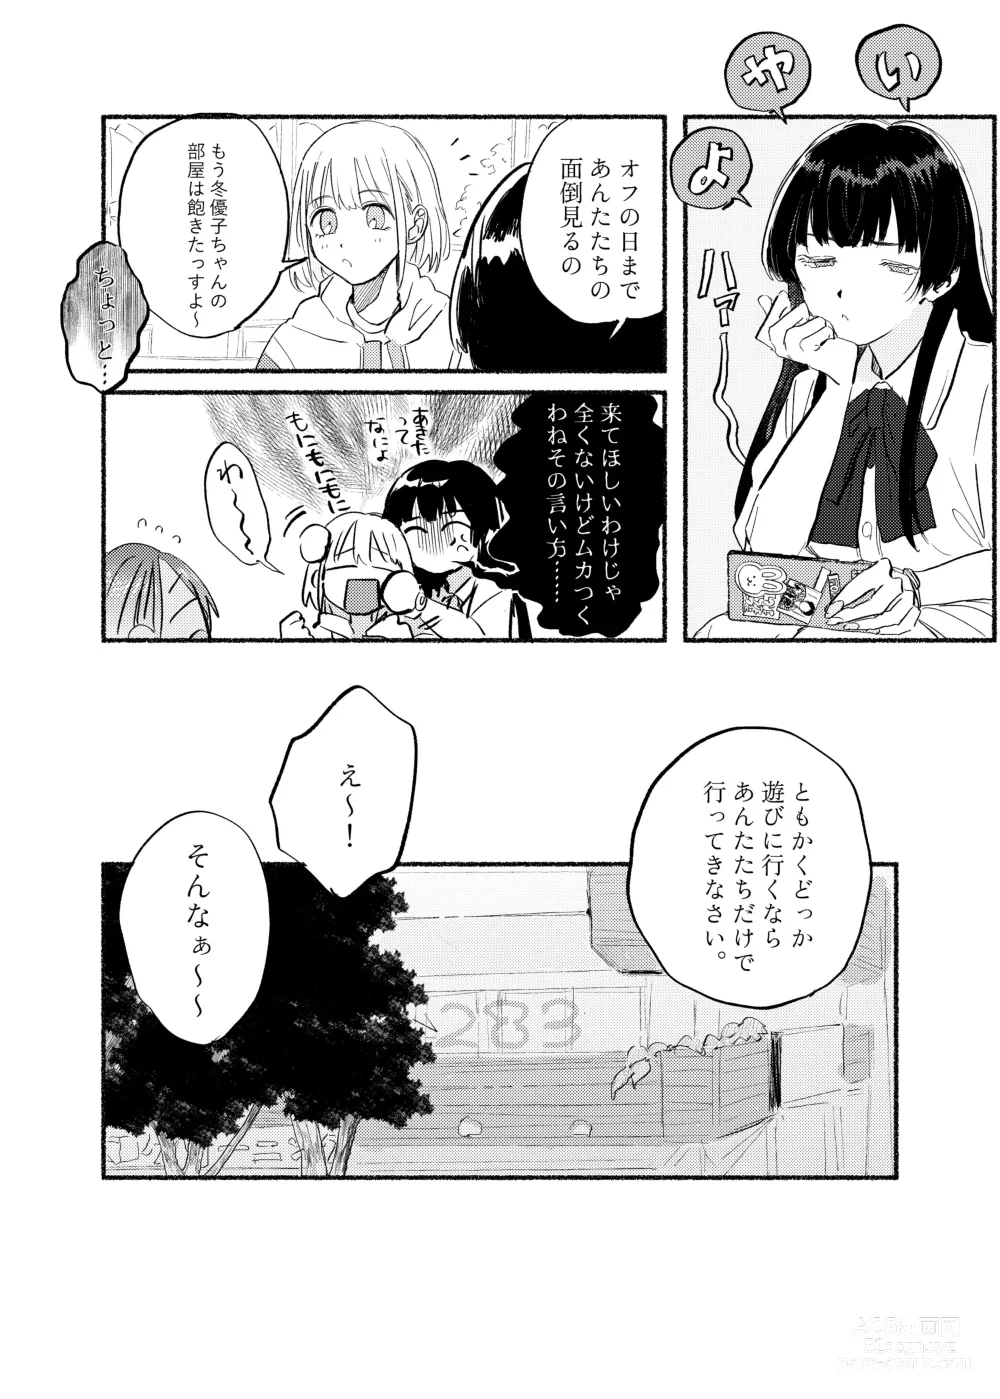 Page 4 of doujinshi IDENTITY REALIZE